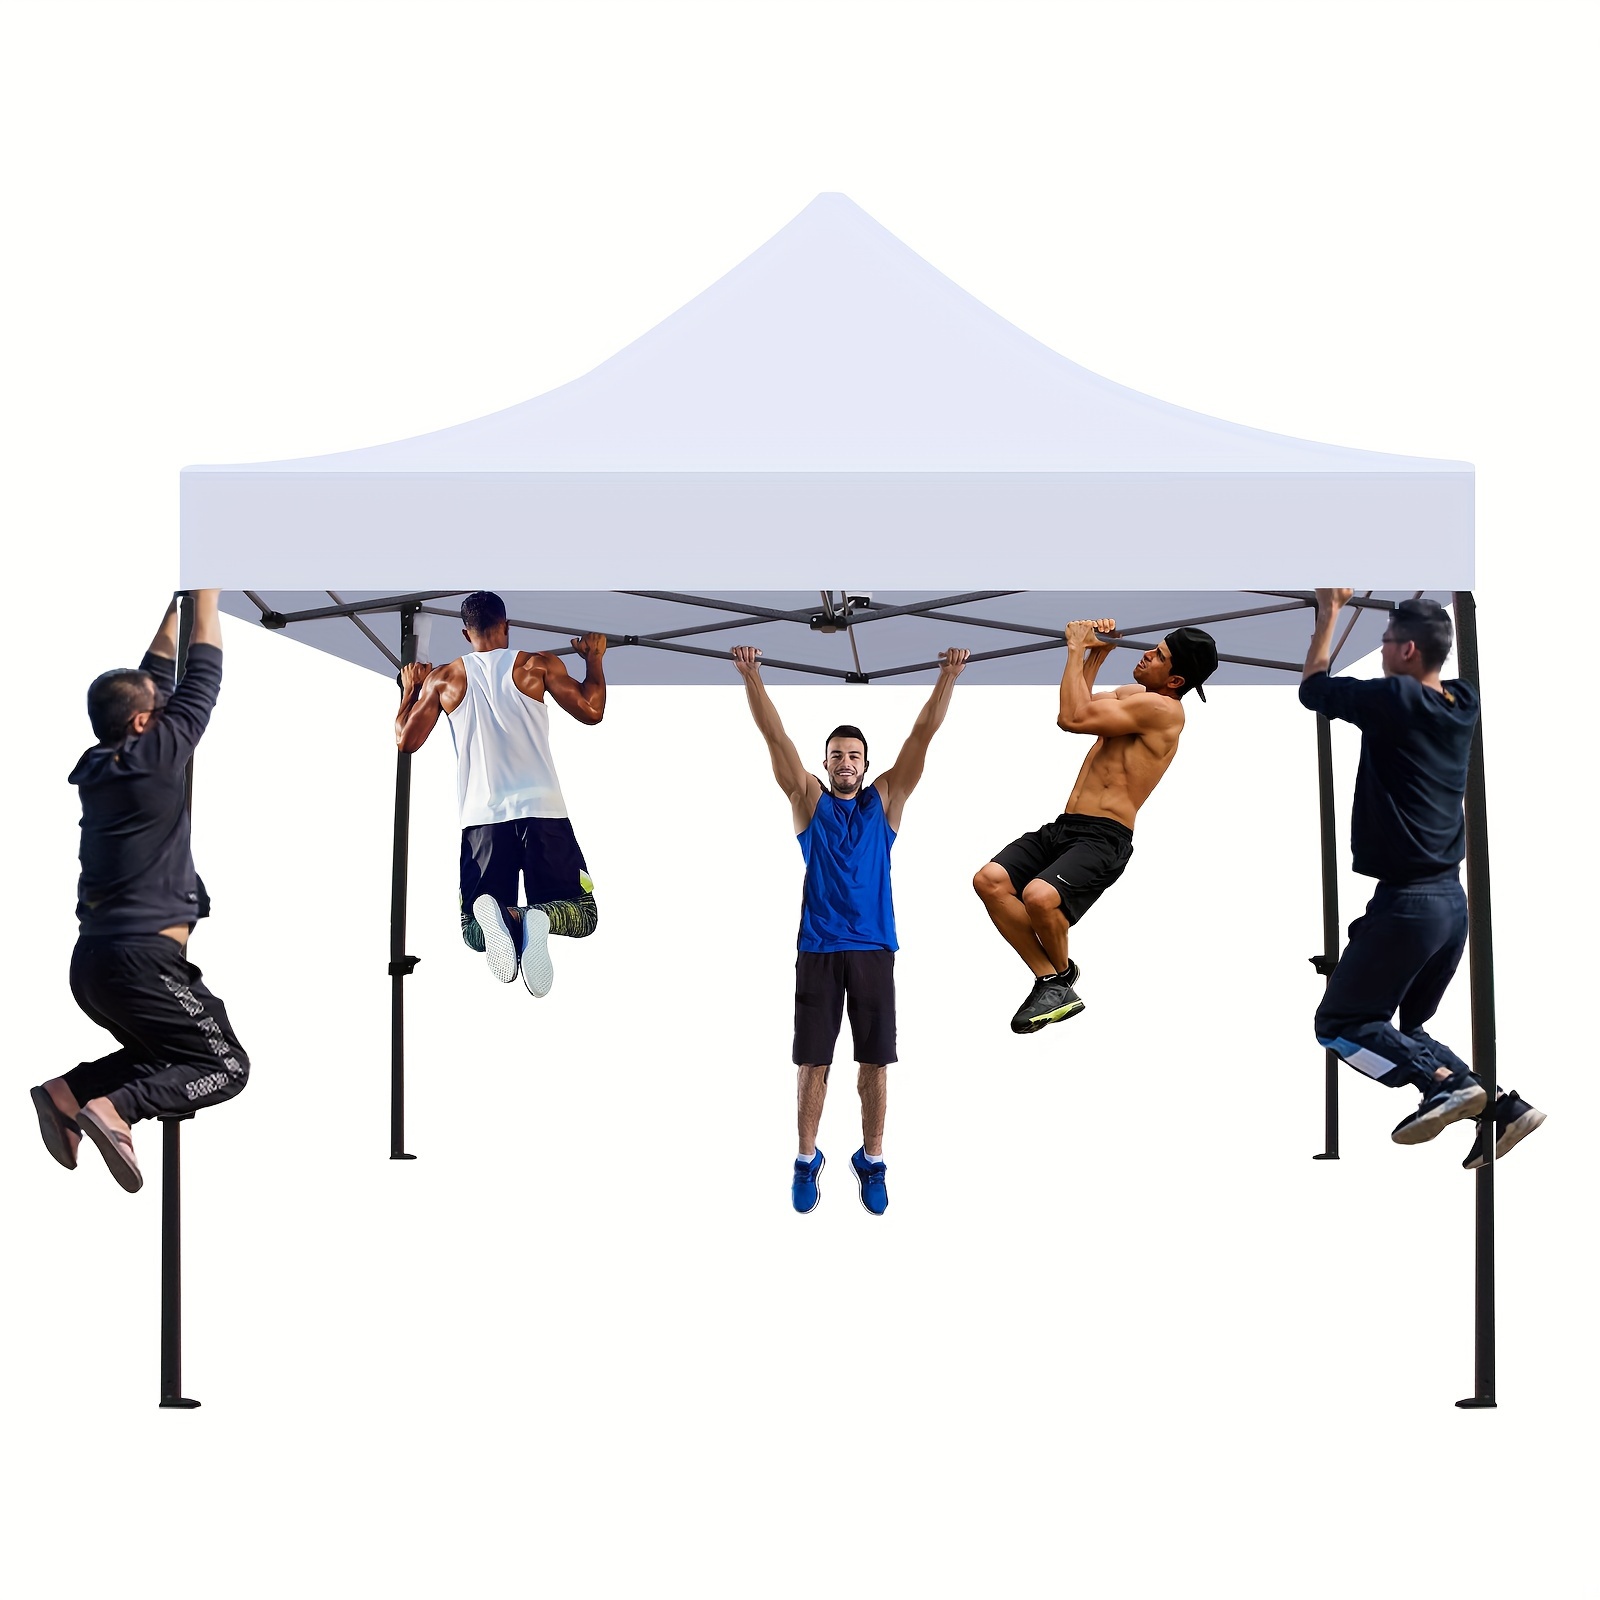 

Commercial Canopy Tent, 10x10 Pop Up Canopy Tent Heavy Duty 500d Waterproof Canopy With Roller Bag & 4 Sandbag For Outdoor Camping Stall Party Event